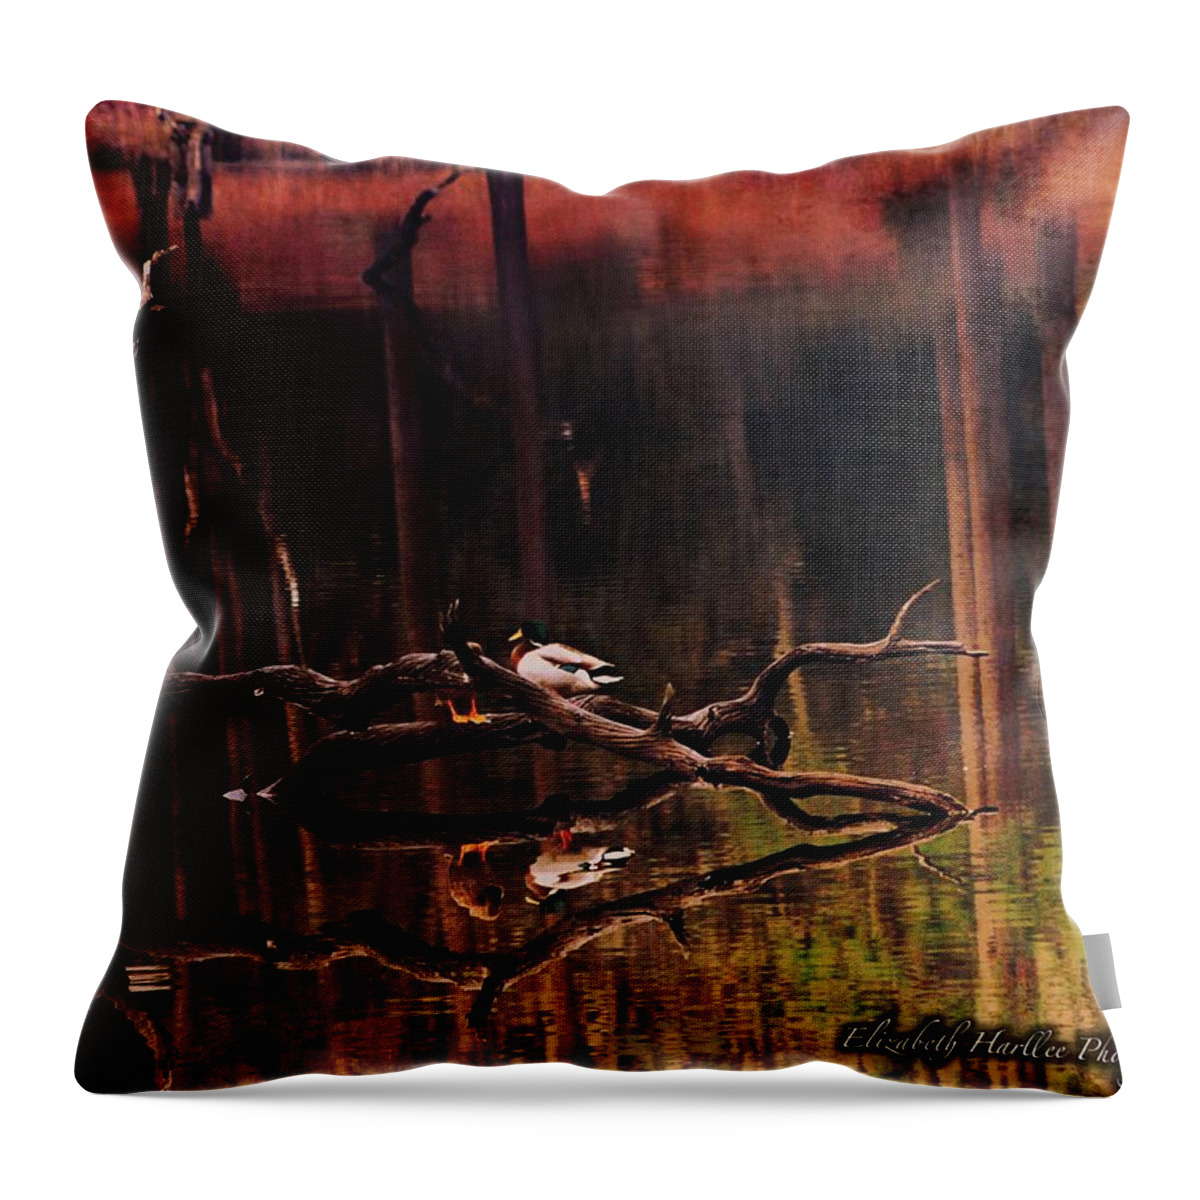 Wildlife Throw Pillow featuring the photograph Mating Call by Elizabeth Harllee